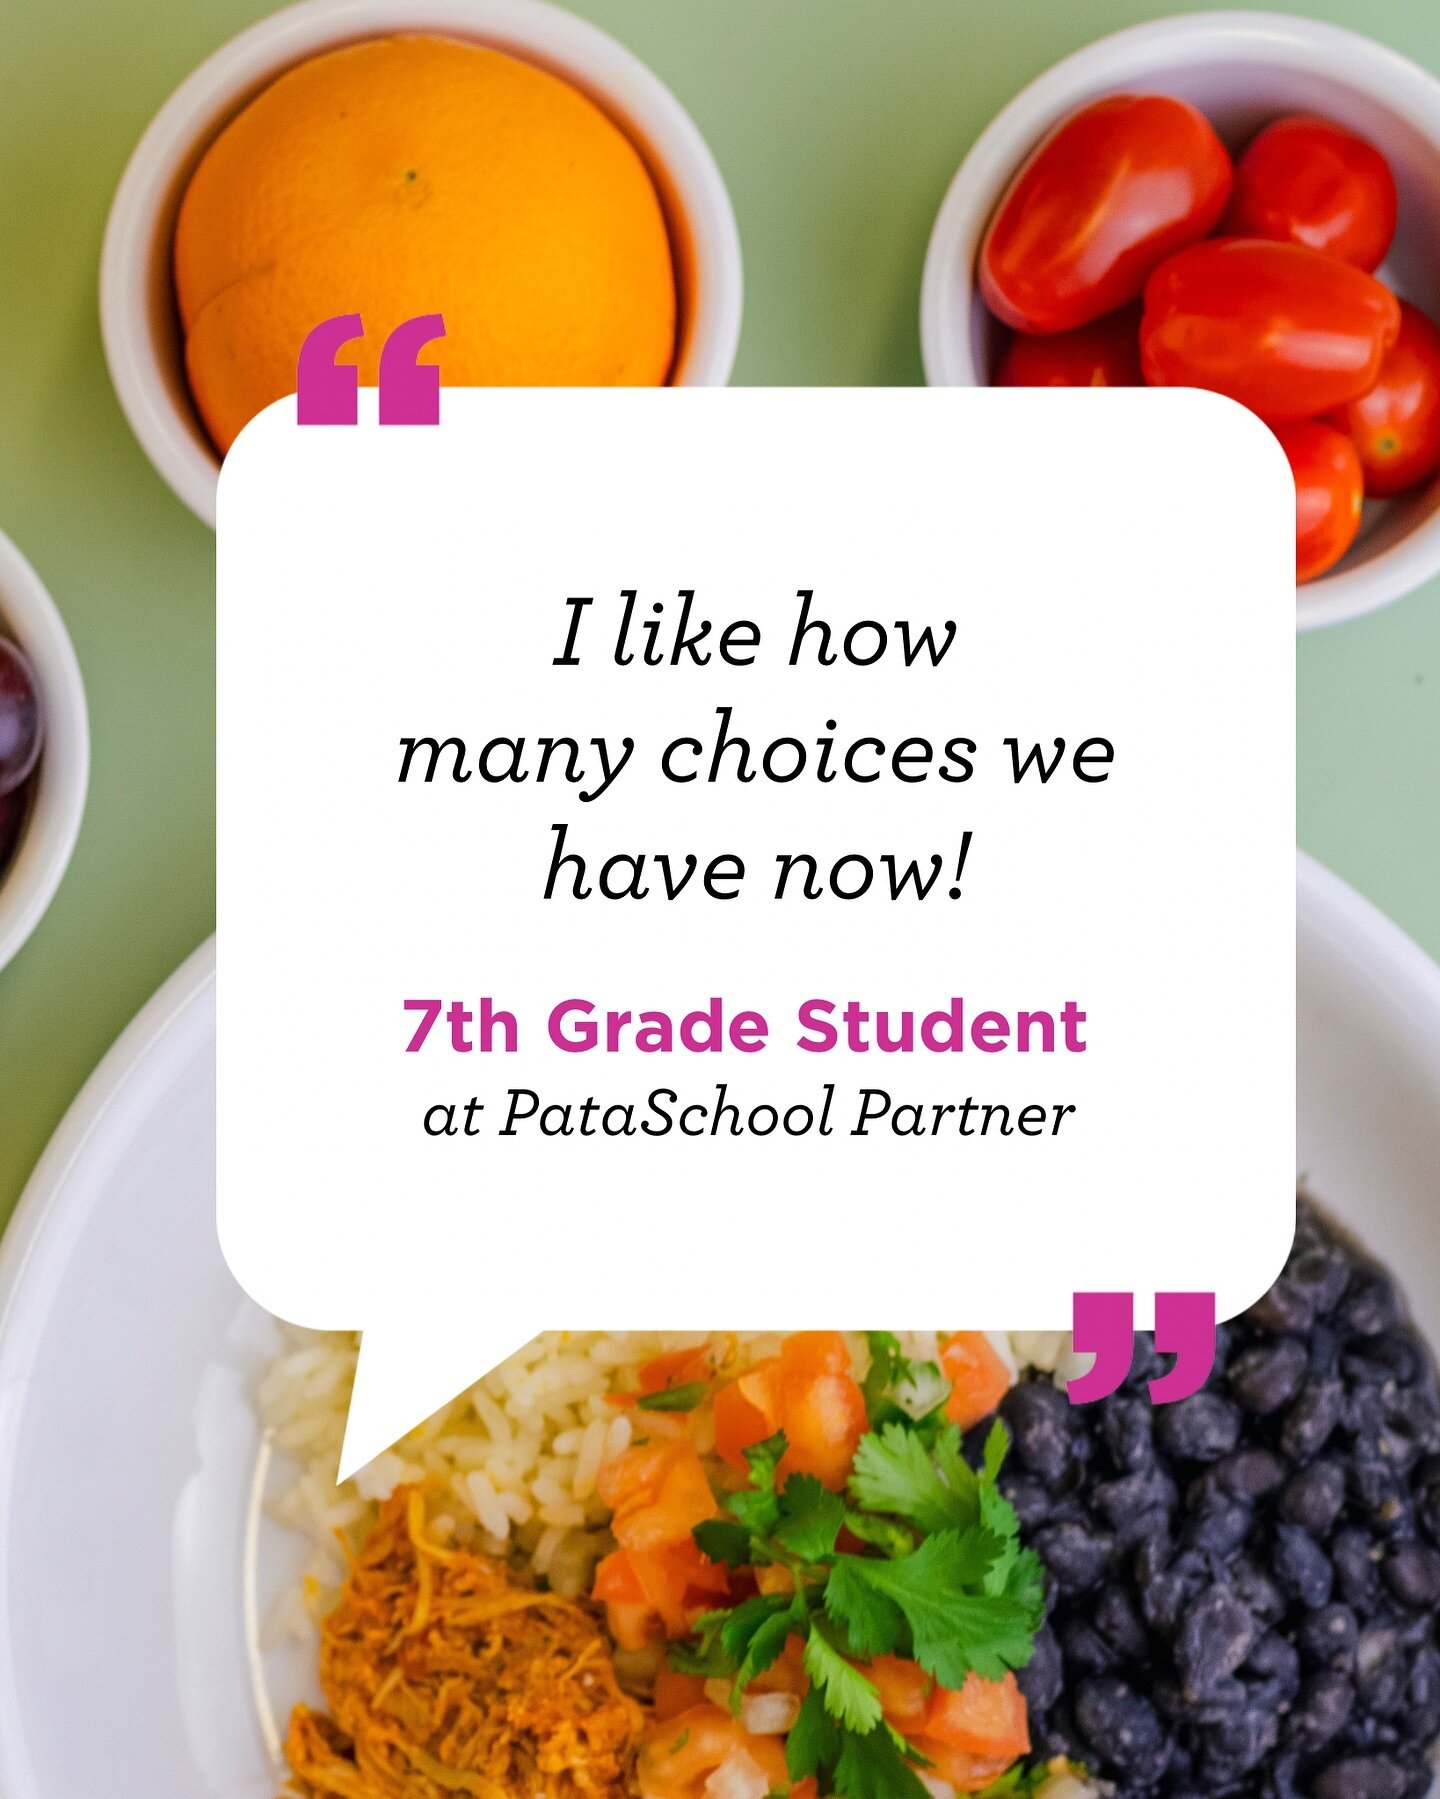 🍽️ PataSchool is all about empowering kids to make their own delicious choices!
 
With two entrees every day and a fresh selection of fruits and veggies, it&rsquo;s all about letting kids pick what fuels their day. 💪🌱 #PataSchool #SchoolKitchensWi